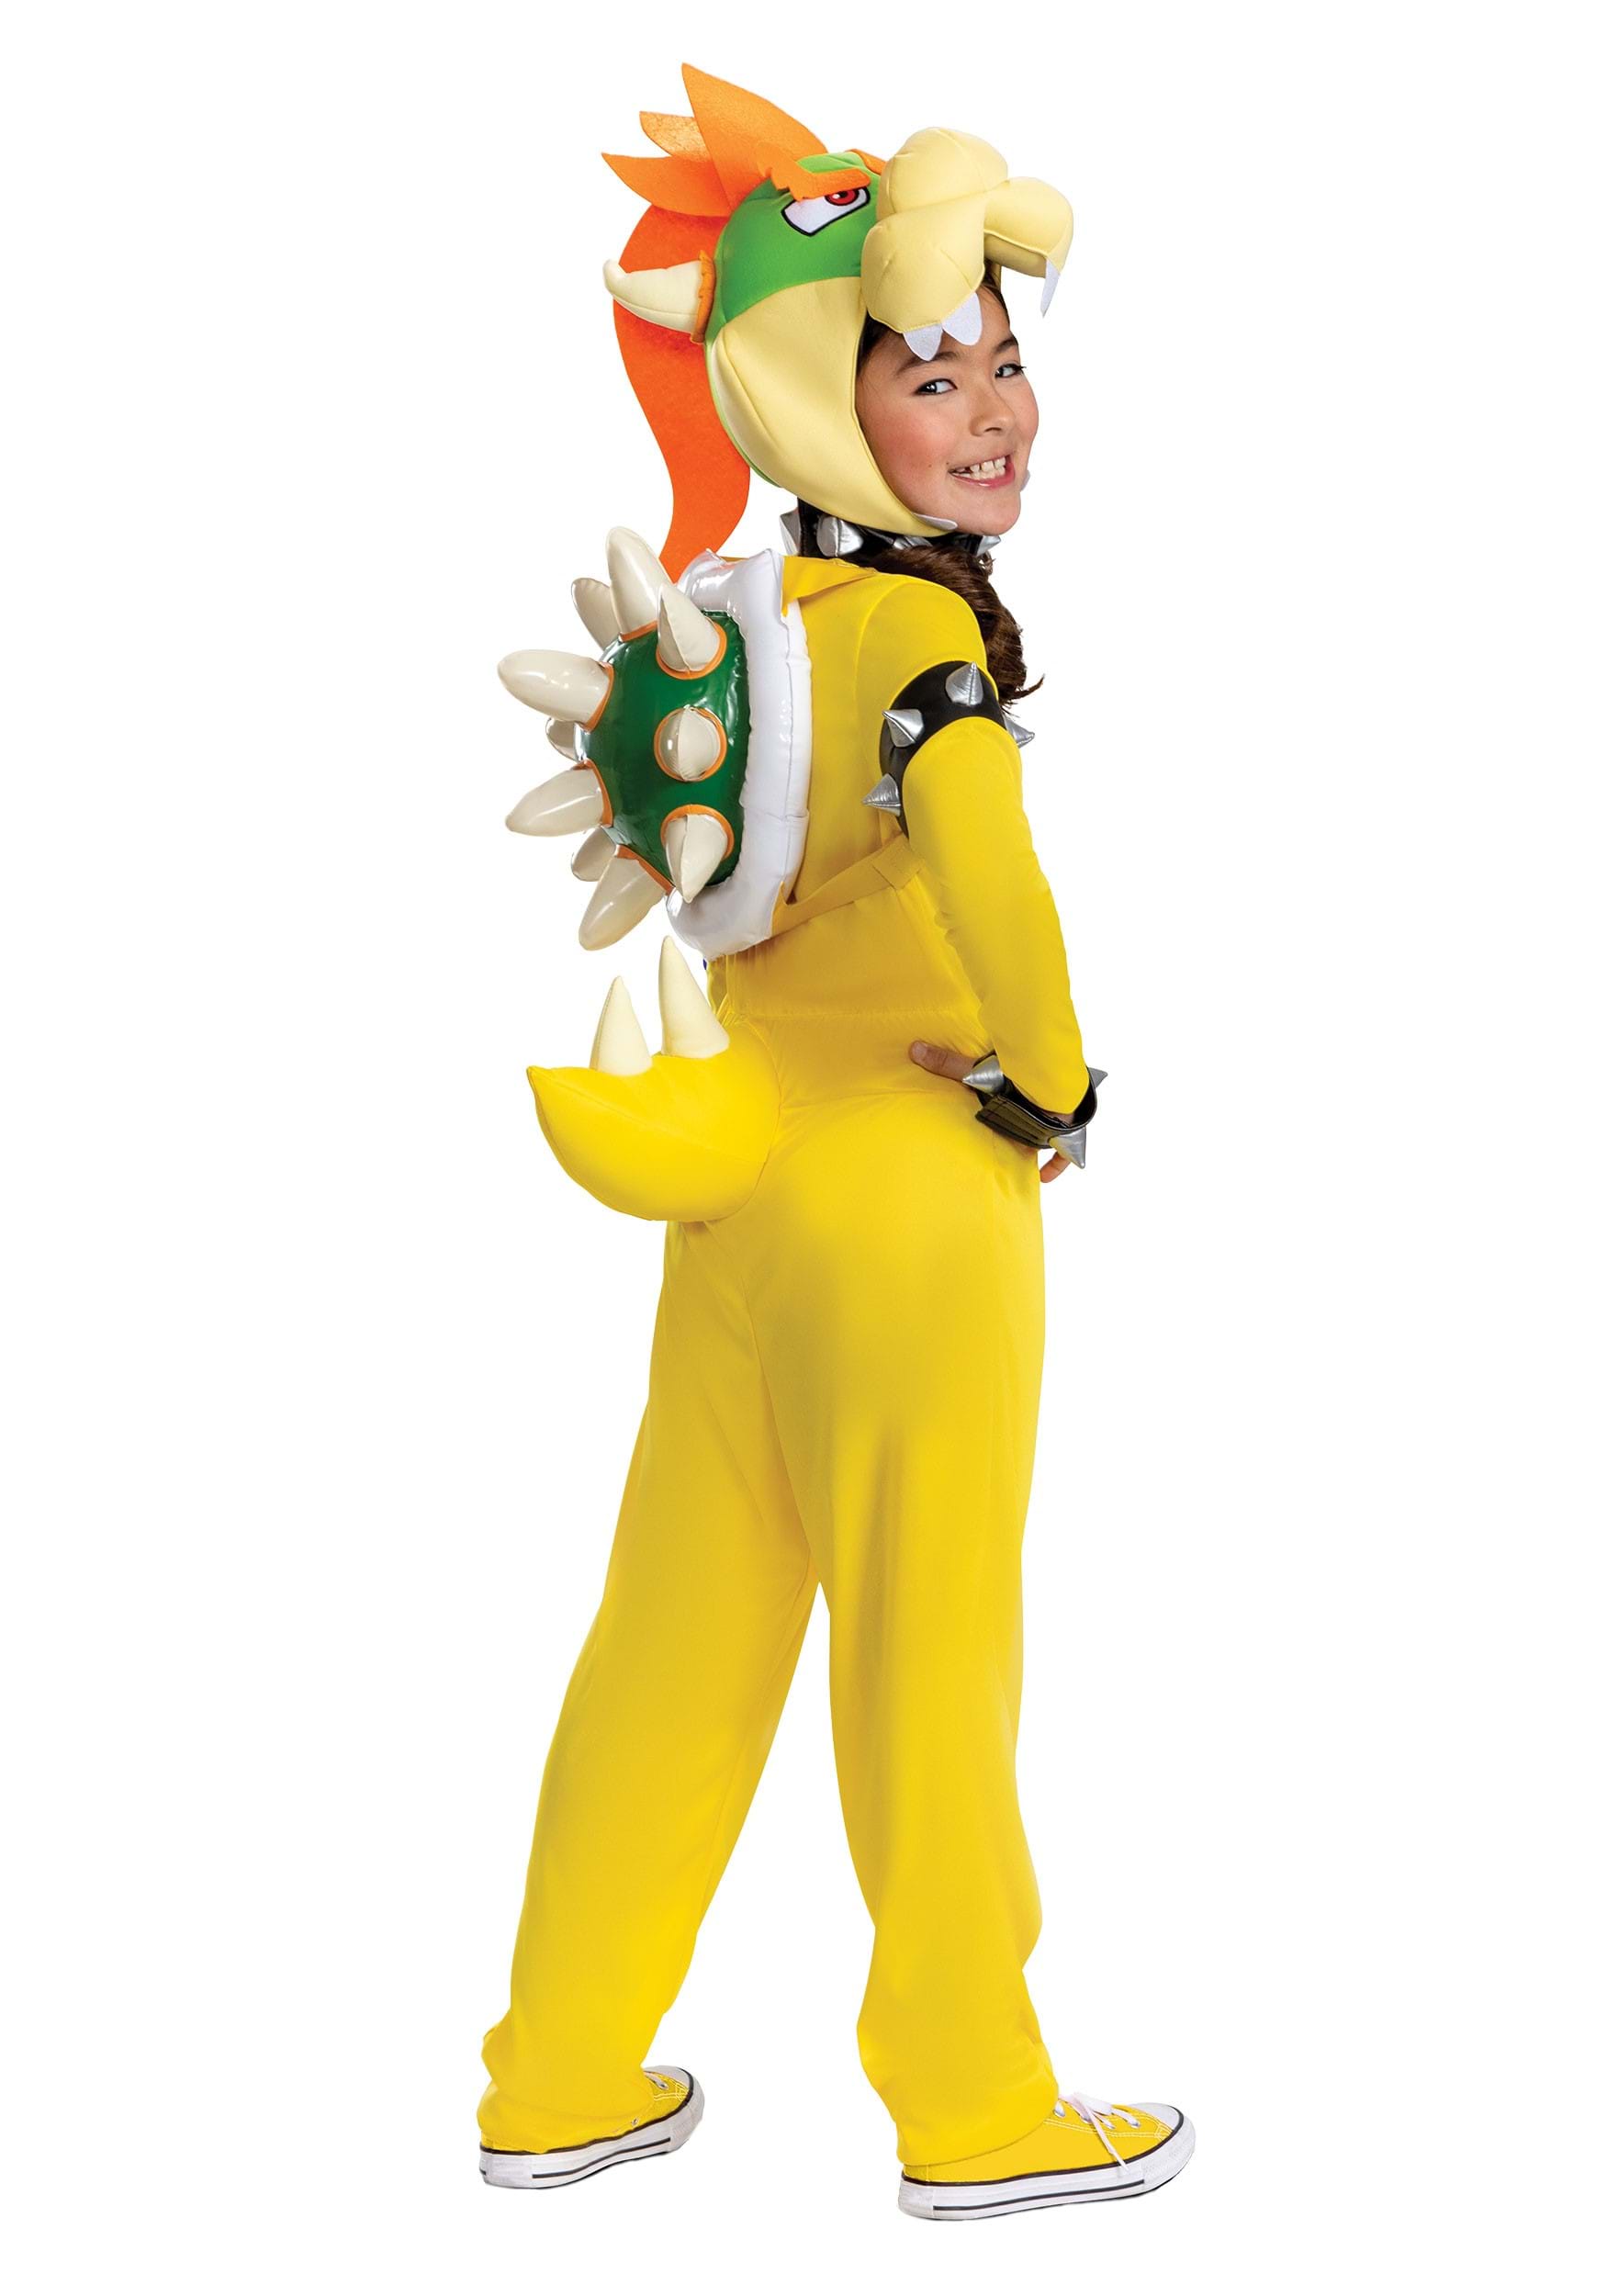 https://images.halloweencostumes.com/products/91935/2-1-294232/super-mario-brothers-boys-bowser-deluxe-costume-e-alt-4.jpg